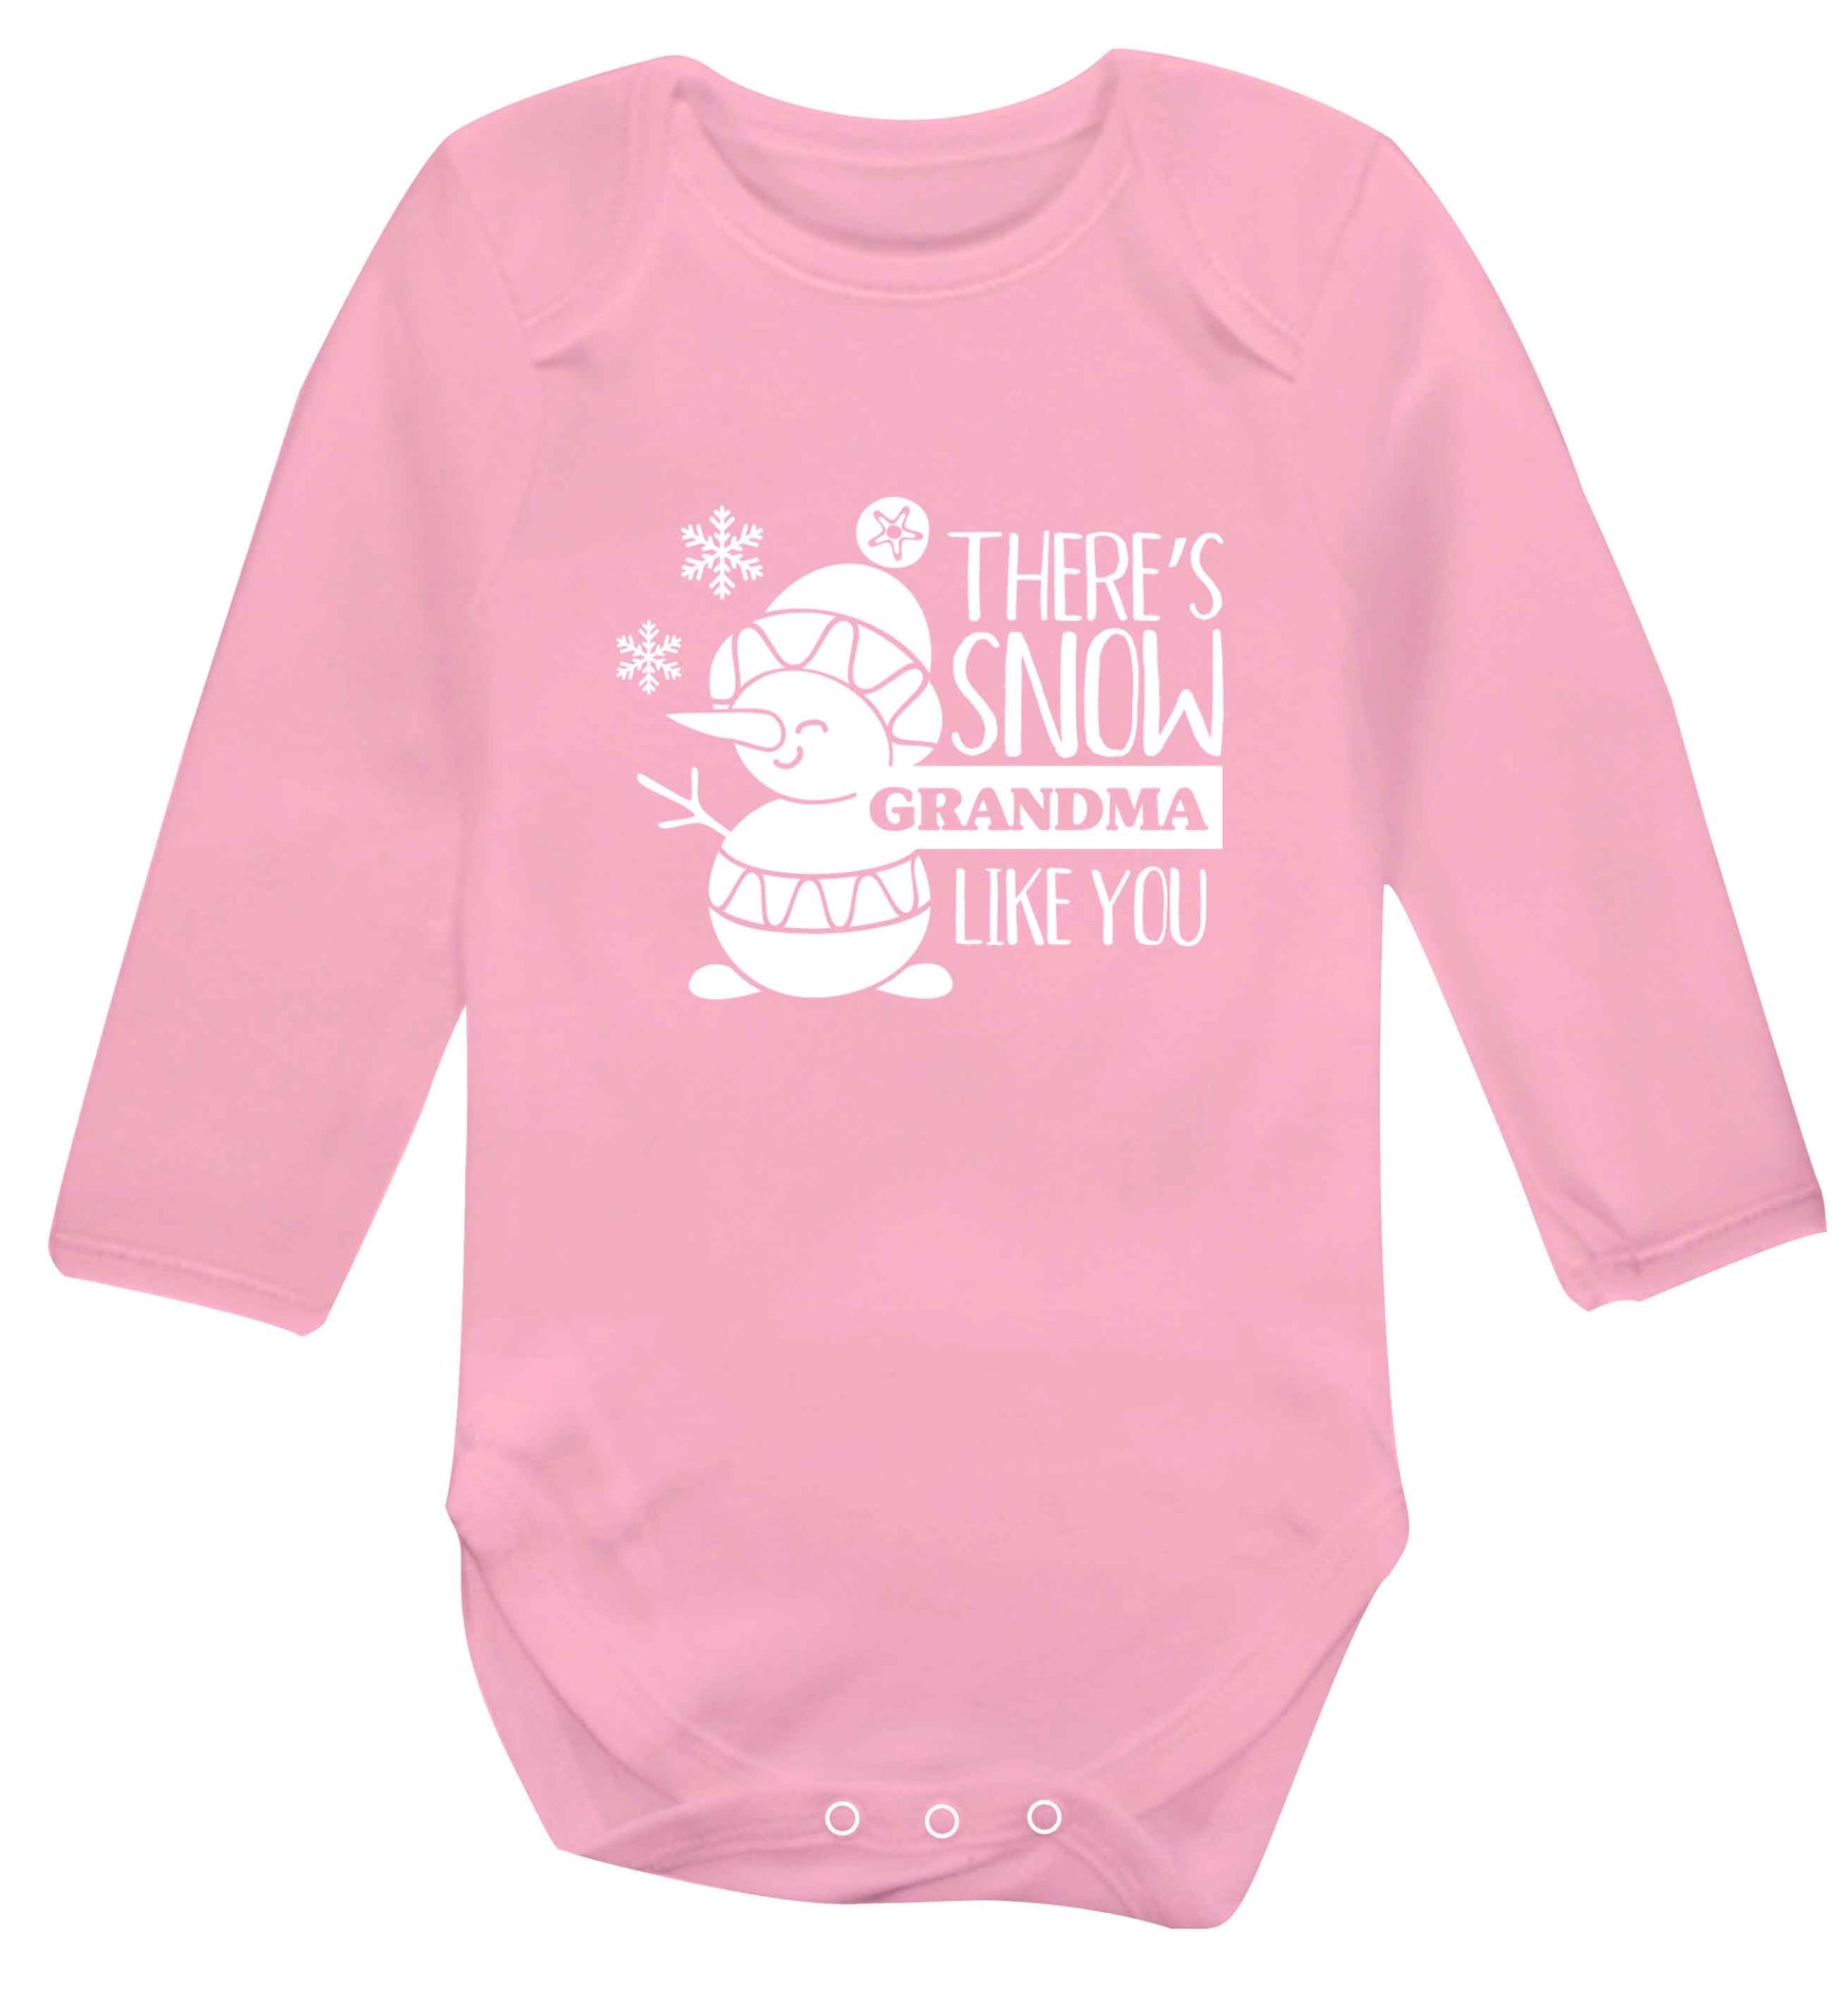 There's snow grandma like you baby vest long sleeved pale pink 6-12 months